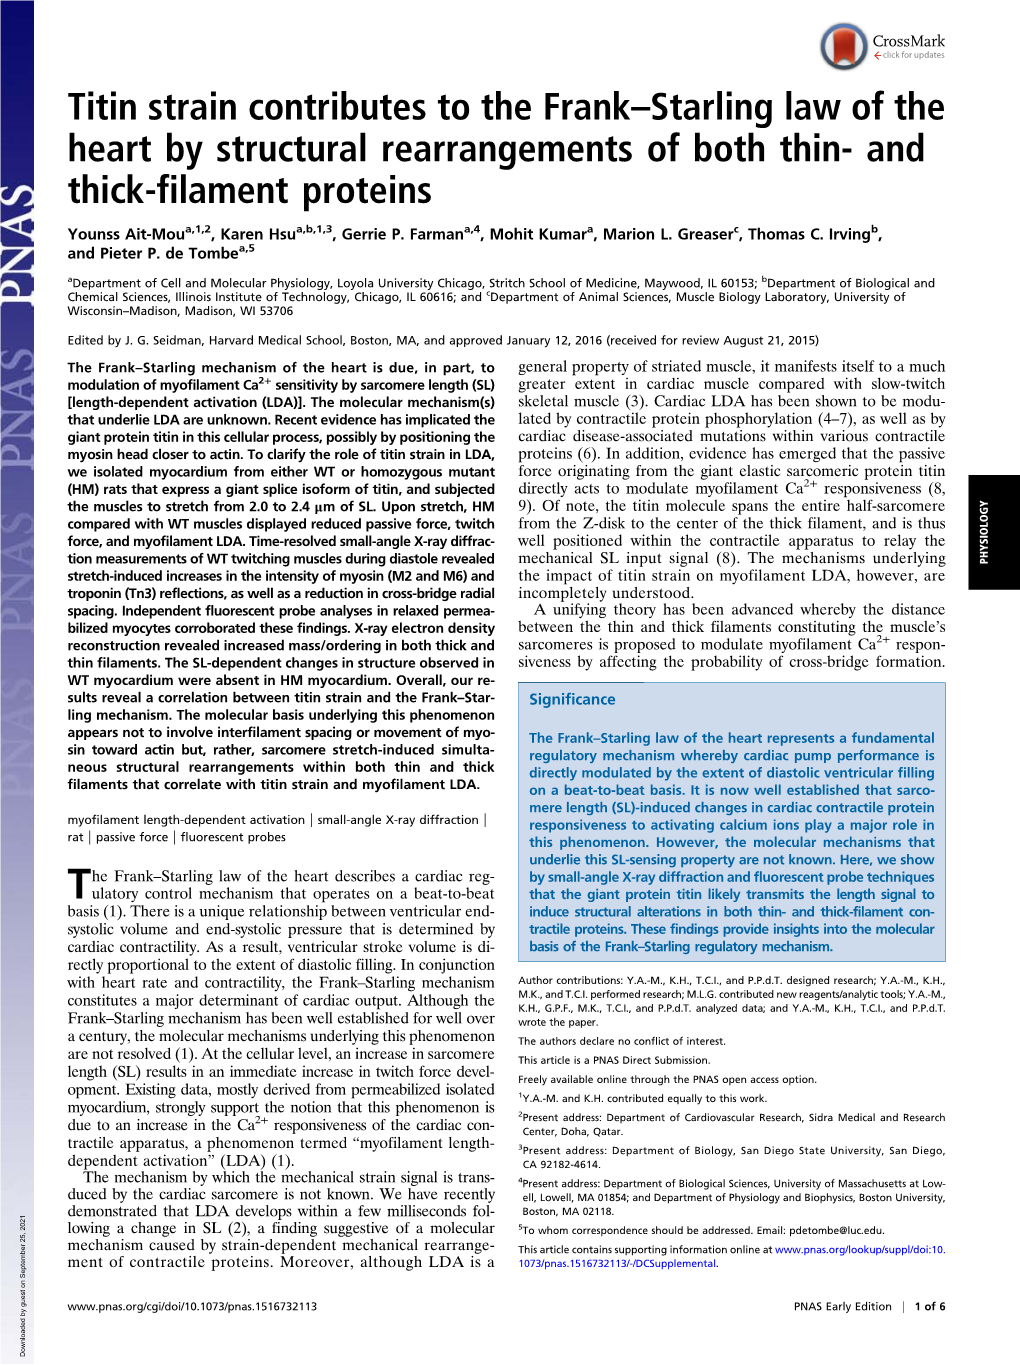 Titin Strain Contributes to the Frank–Starling Law of the Heart by Structural Rearrangements of Both Thin- and Thick-Filament Proteins